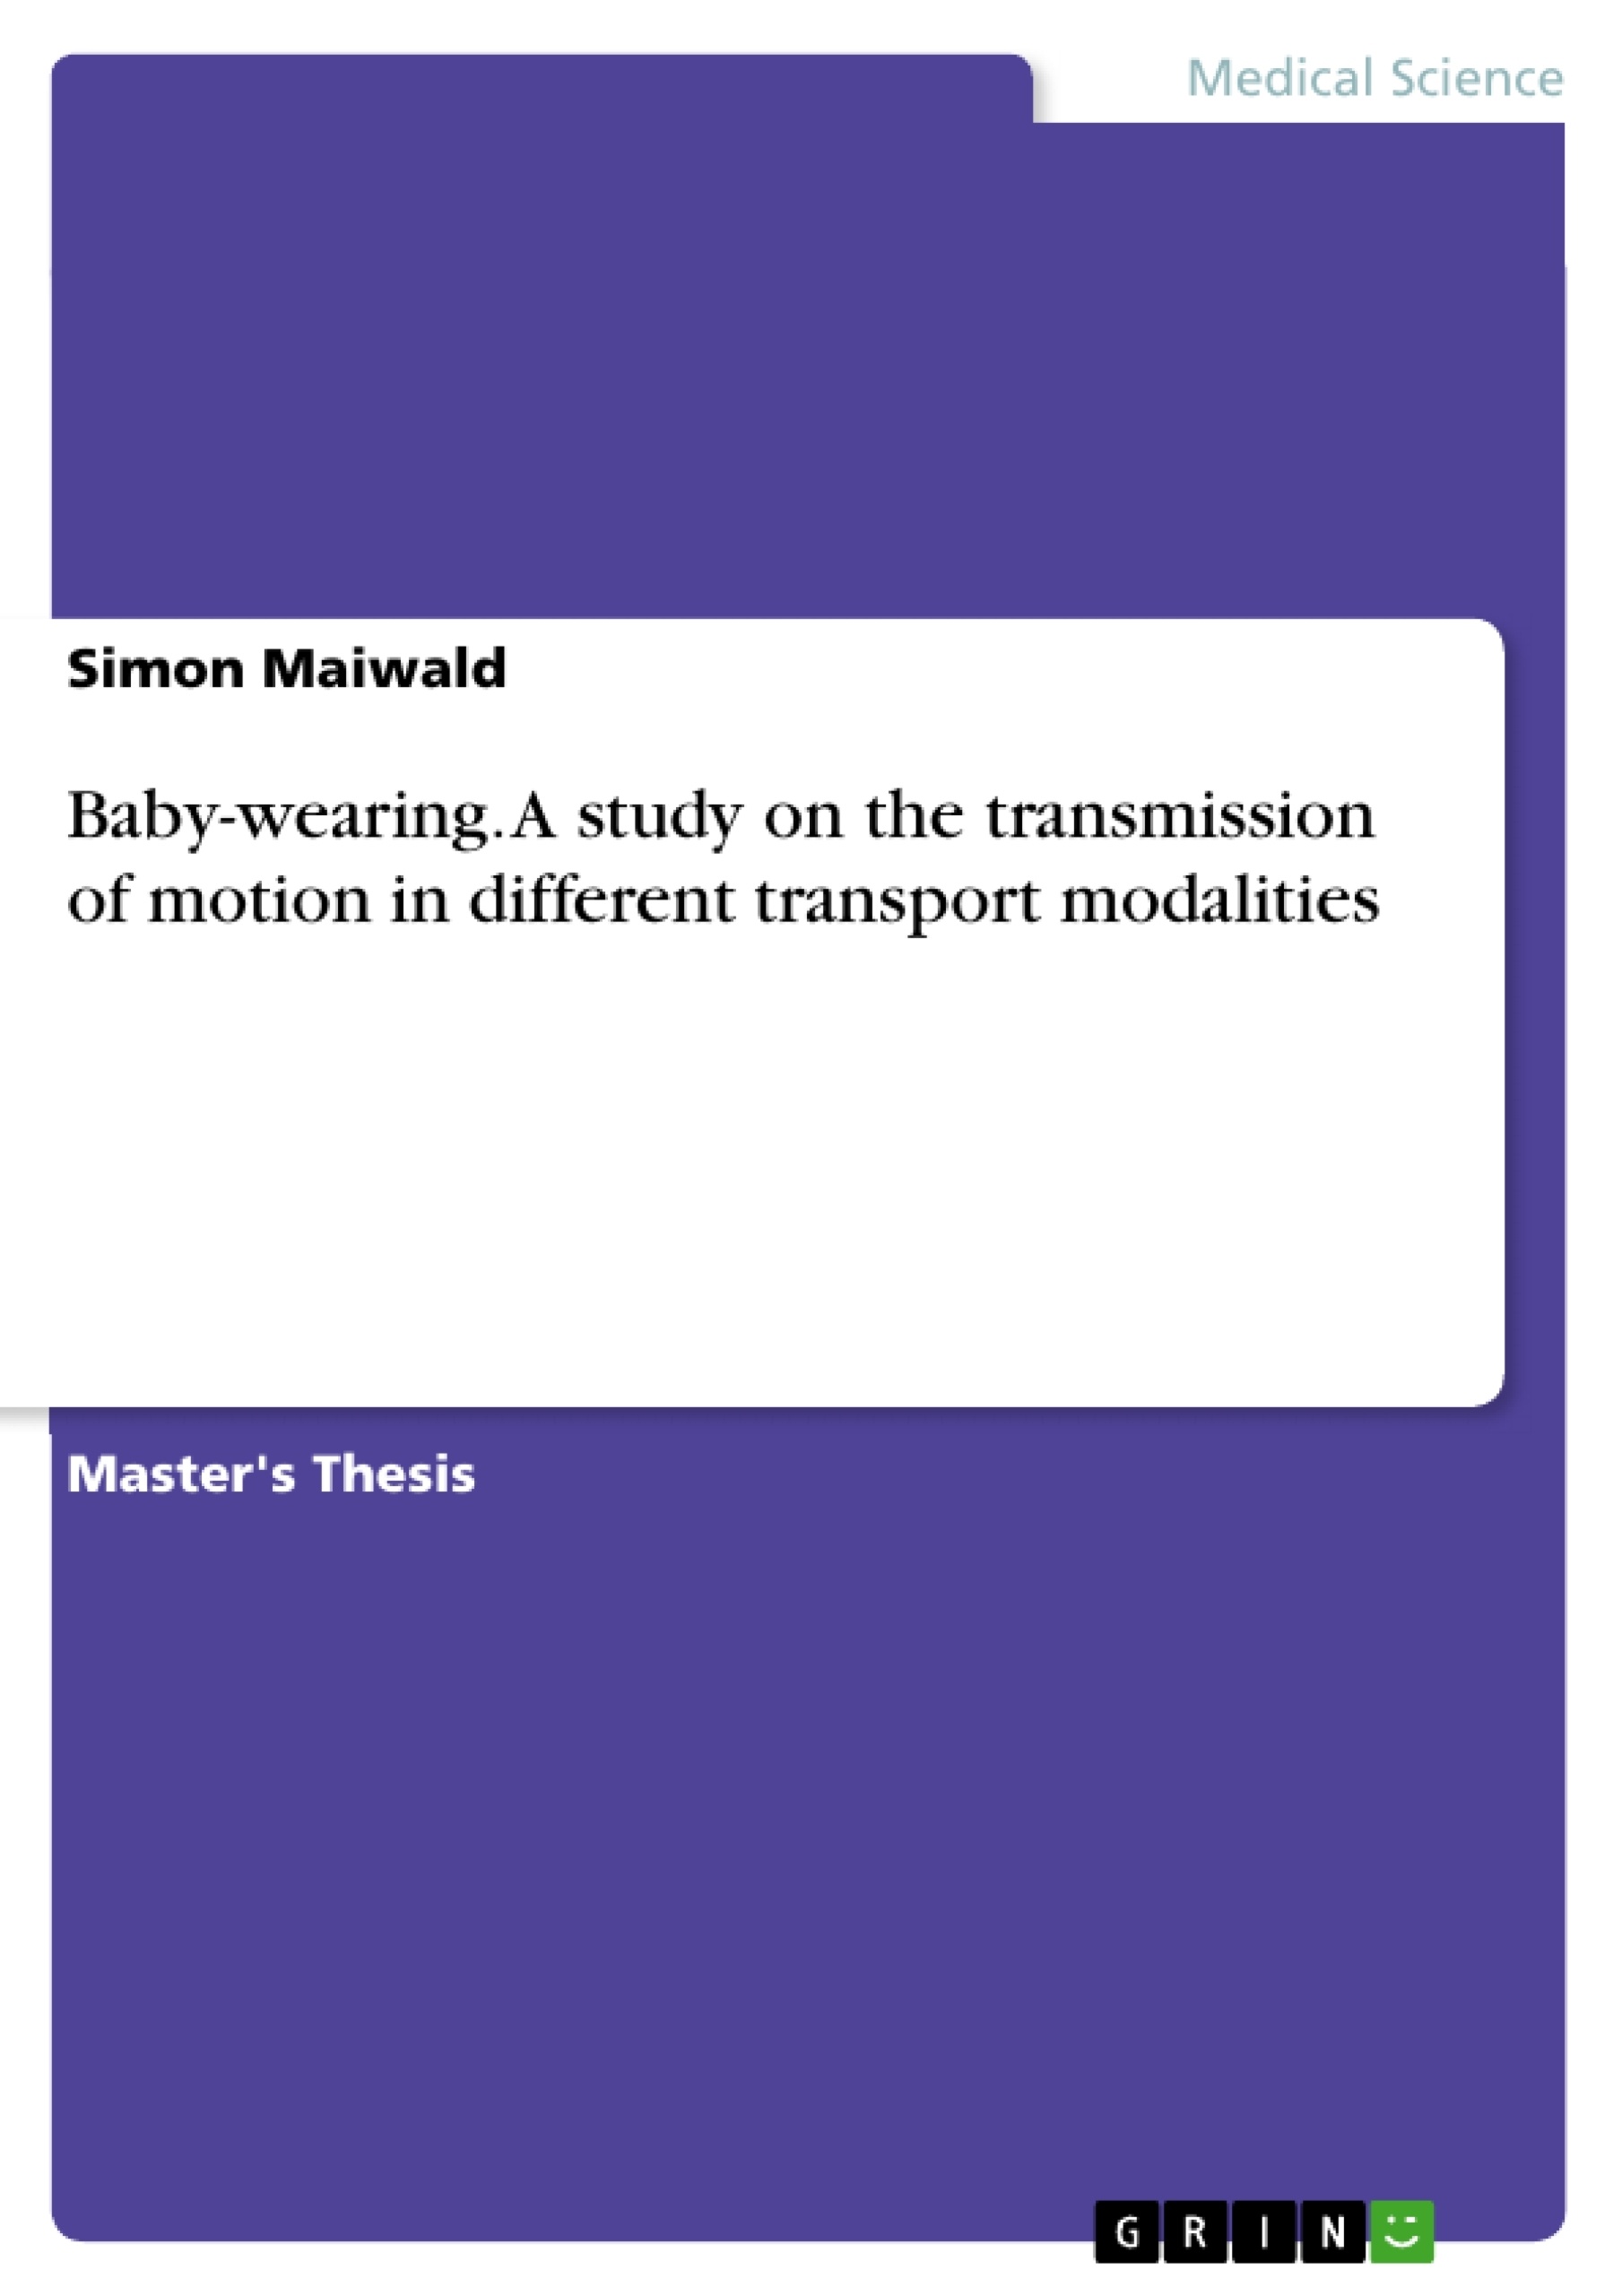 Título: Baby-wearing. A study on the transmission of motion in different transport modalities